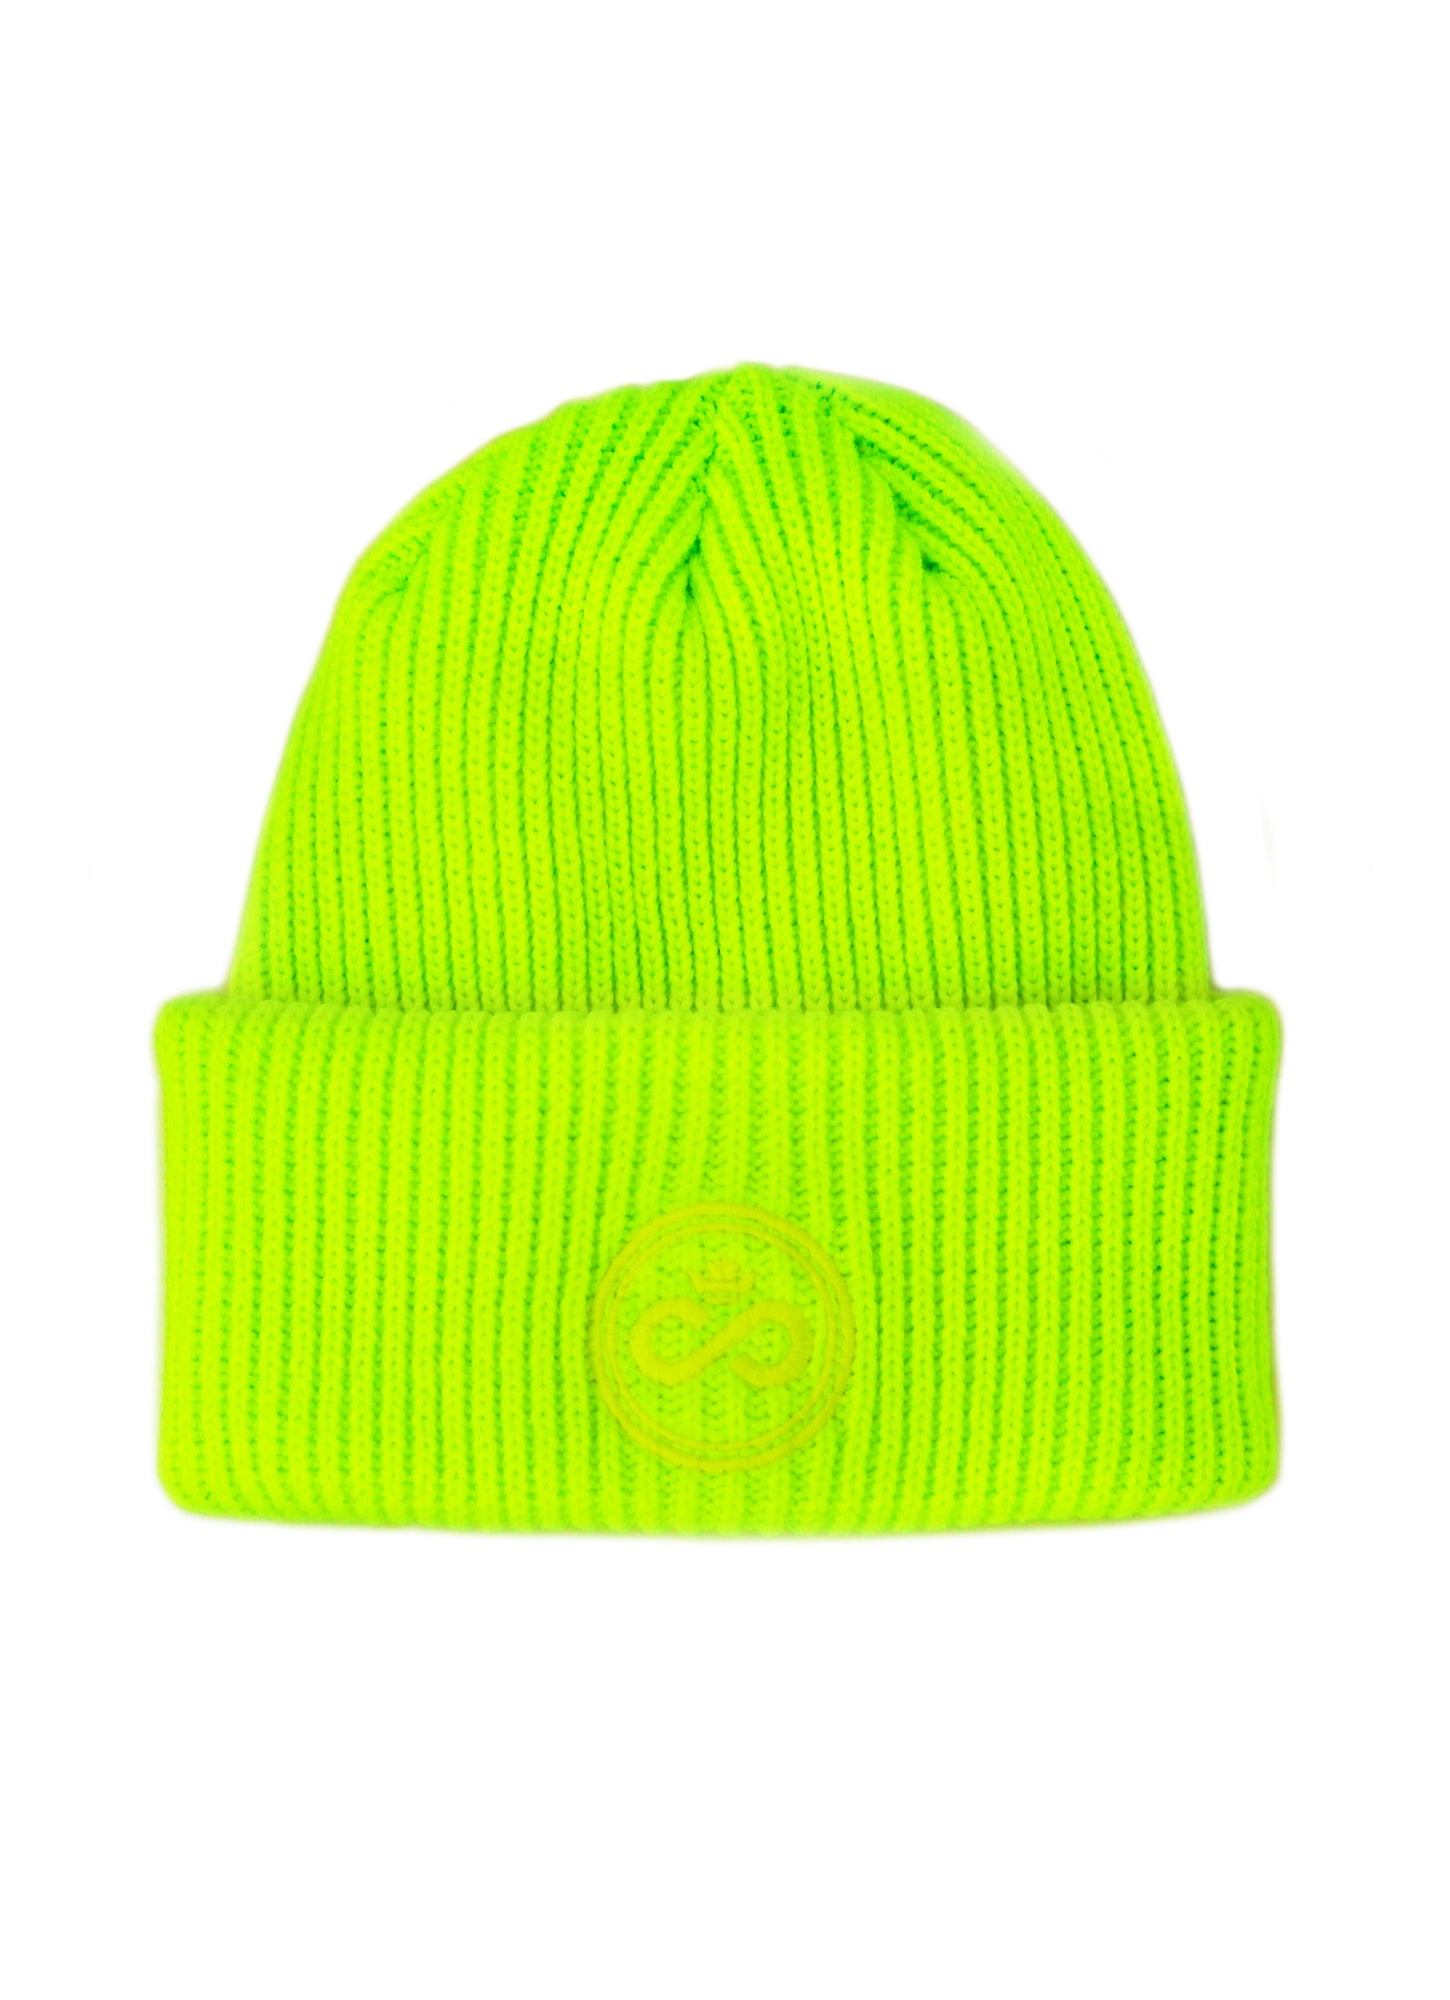 Tuque fluo Nomade - taille adulte